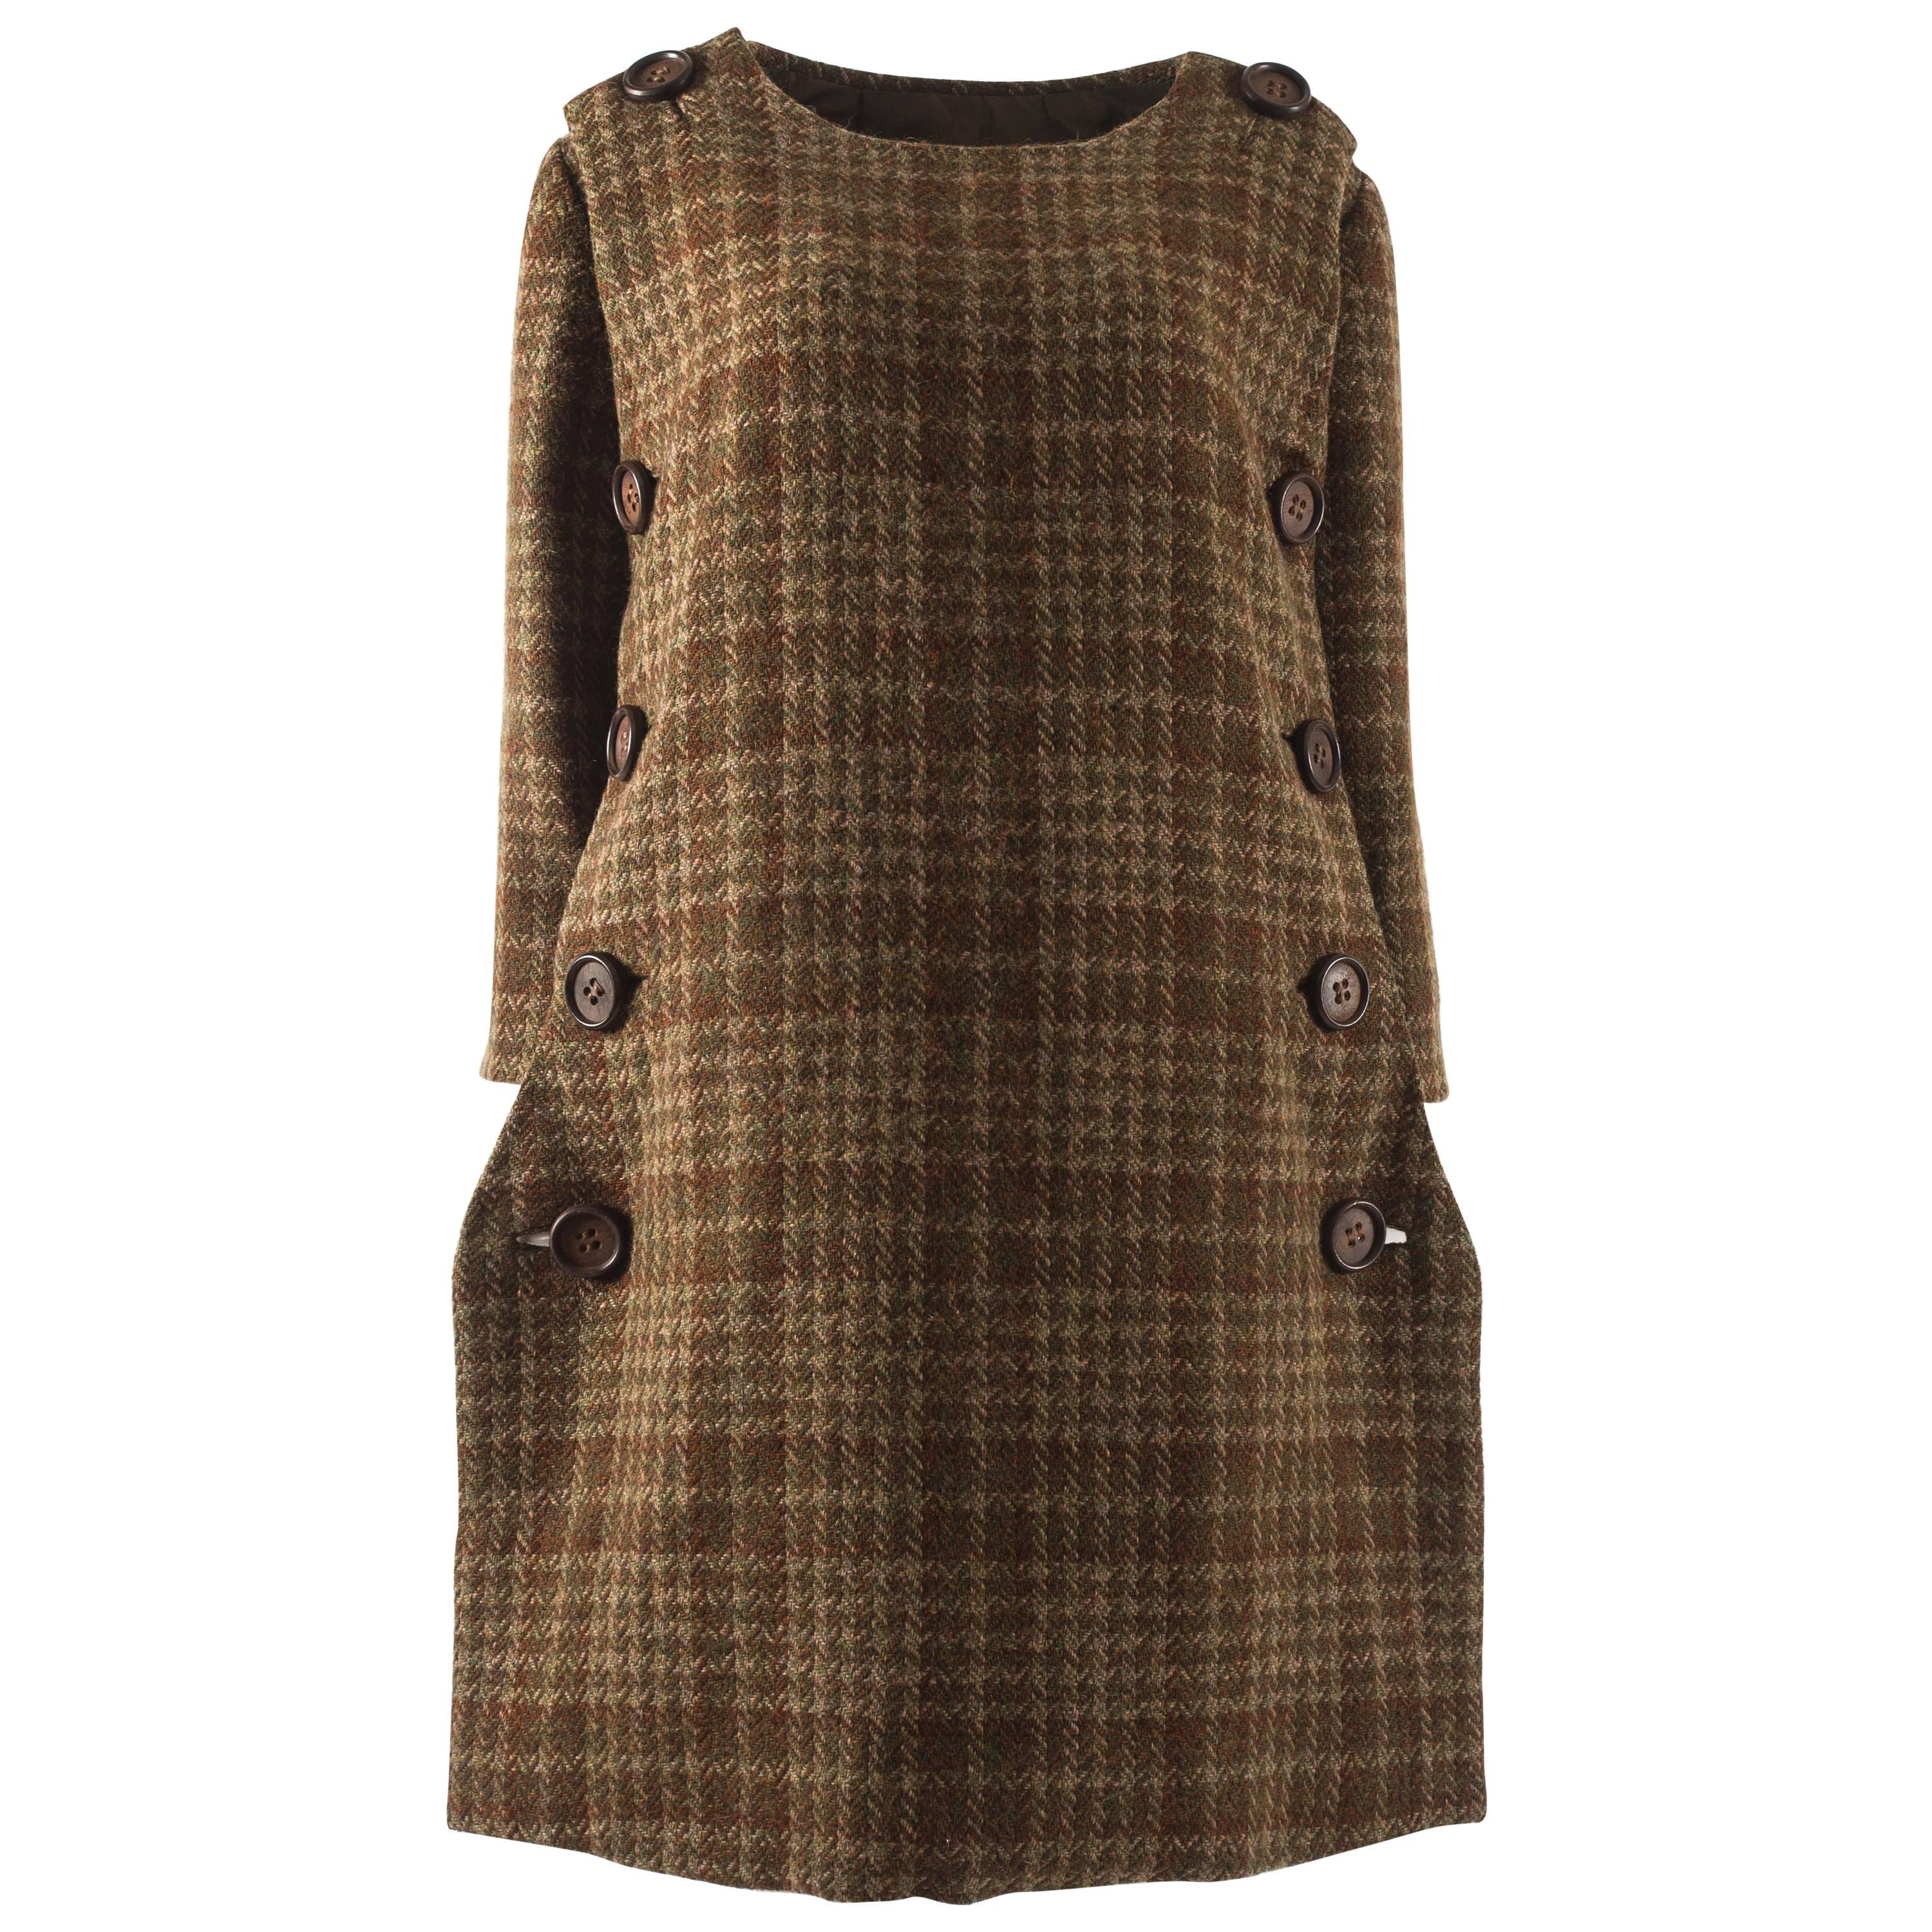 Jeanne Lanvin haute couture green tartan tweed coat and skirt set, c. 1940s For Sale